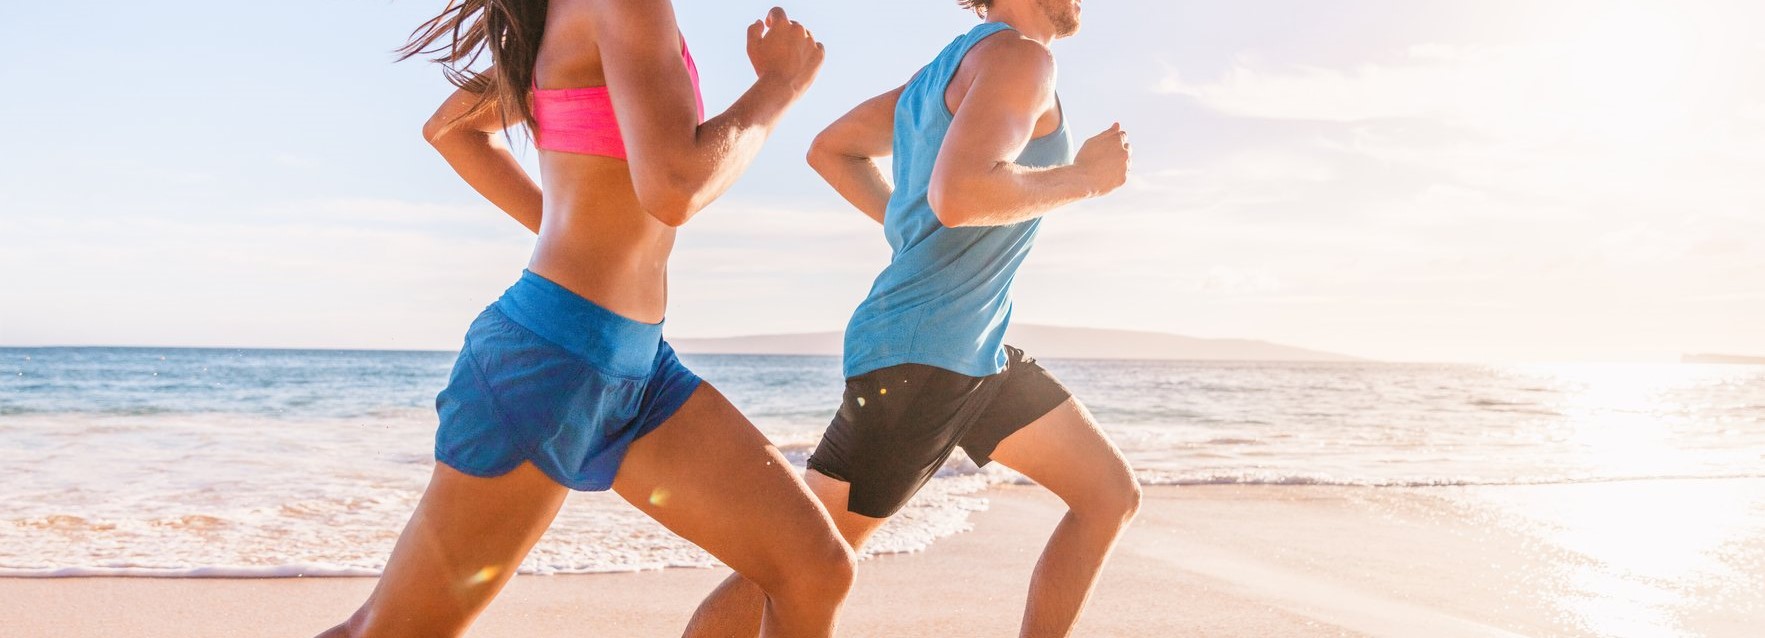 Run fit people running on beach with healthy toned legs body, Hamstring muscles, knee joint health active lifestyle panoramic banner background.